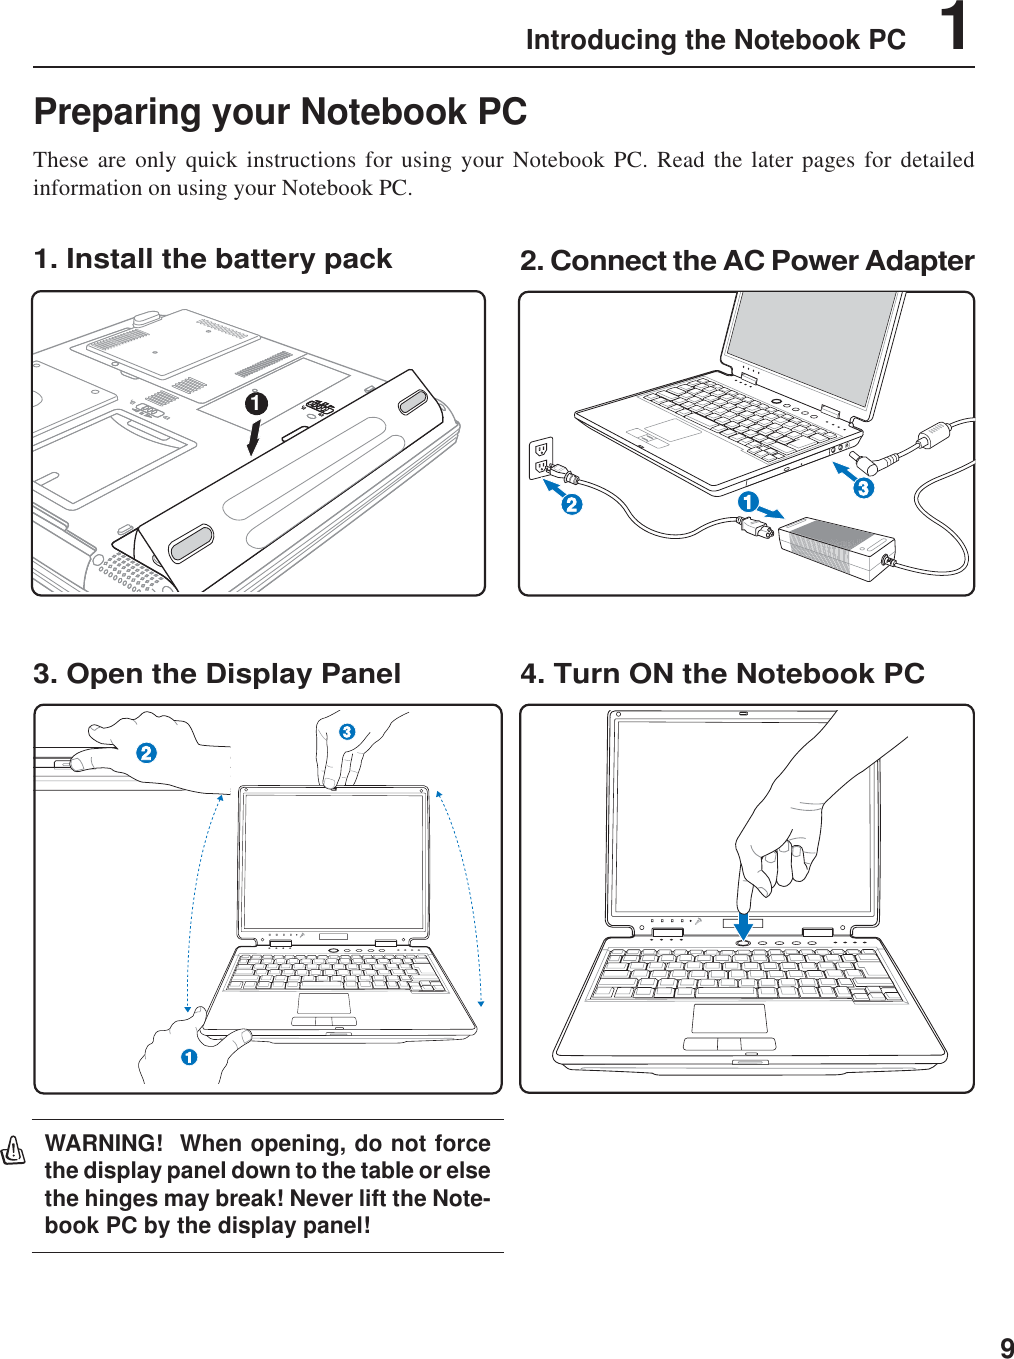 9Introducing the Notebook PC    1Preparing your Notebook PCThese are only quick instructions for using your Notebook PC. Read the later pages for detailedinformation on using your Notebook PC.1. Install the battery pack3. Open the Display Panel 4. Turn ON the Notebook PC2. Connect the AC Power Adapter1132WARNING!  When opening, do not forcethe display panel down to the table or elsethe hinges may break! Never lift the Note-book PC by the display panel!213